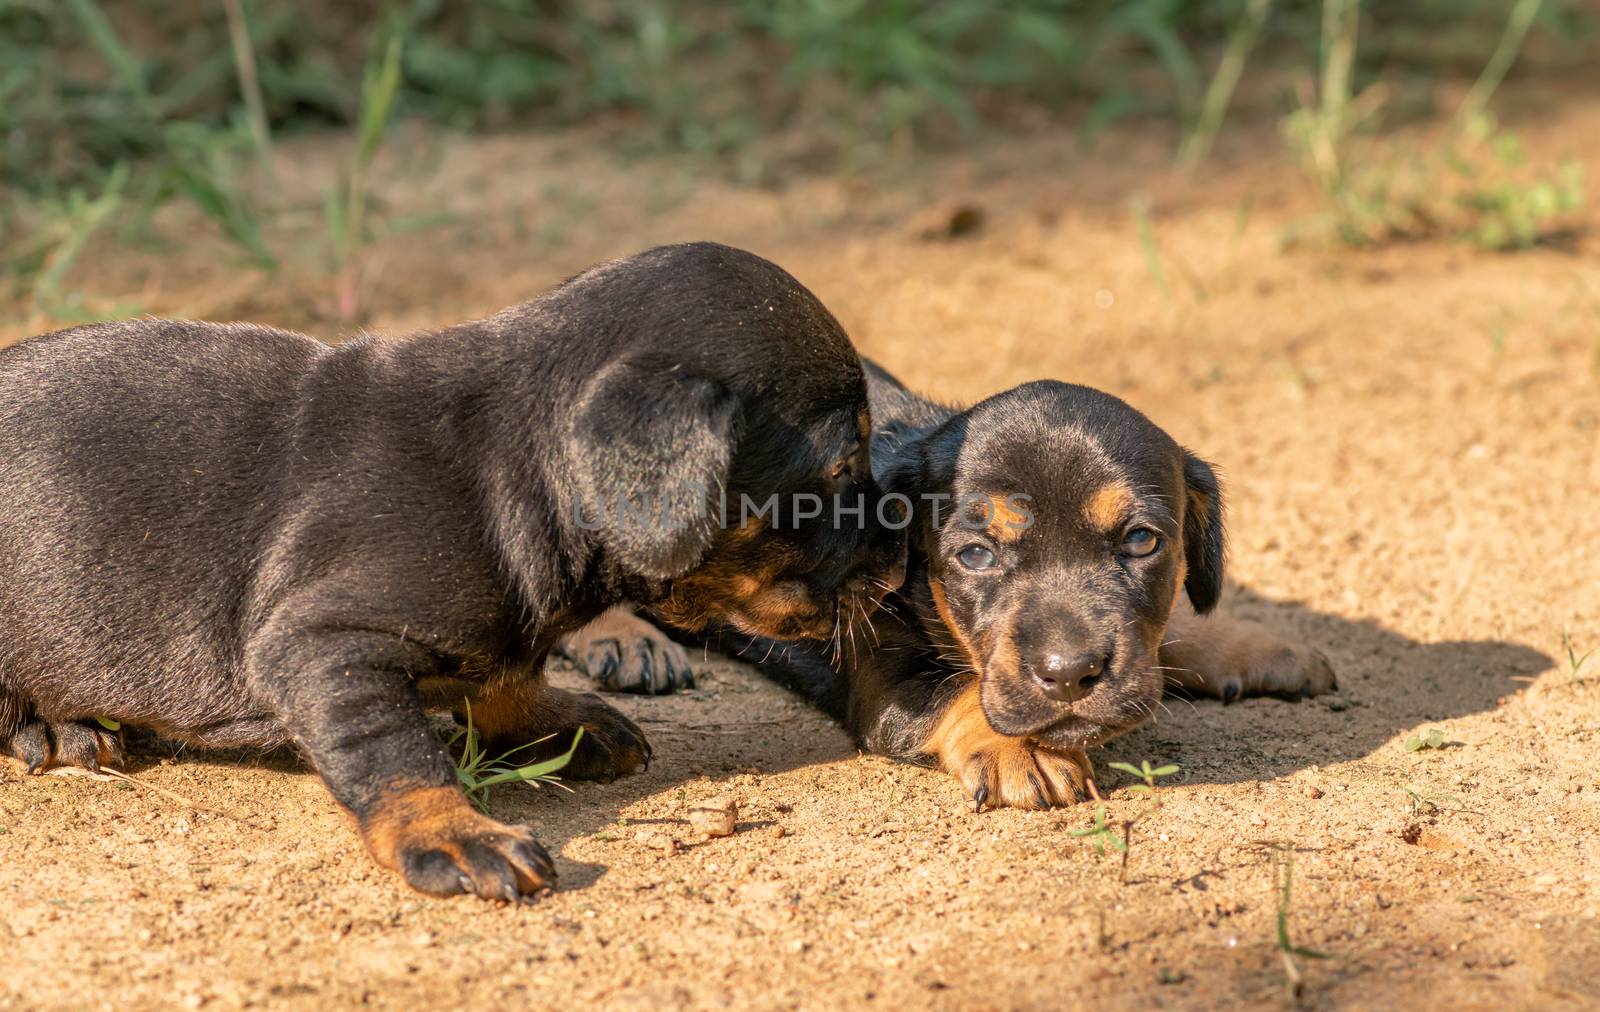 Dachshund puppies starting to explore the world around them for the 1st time, evening light hit their faces, siblings love, older sibling taking care of the younger sister,